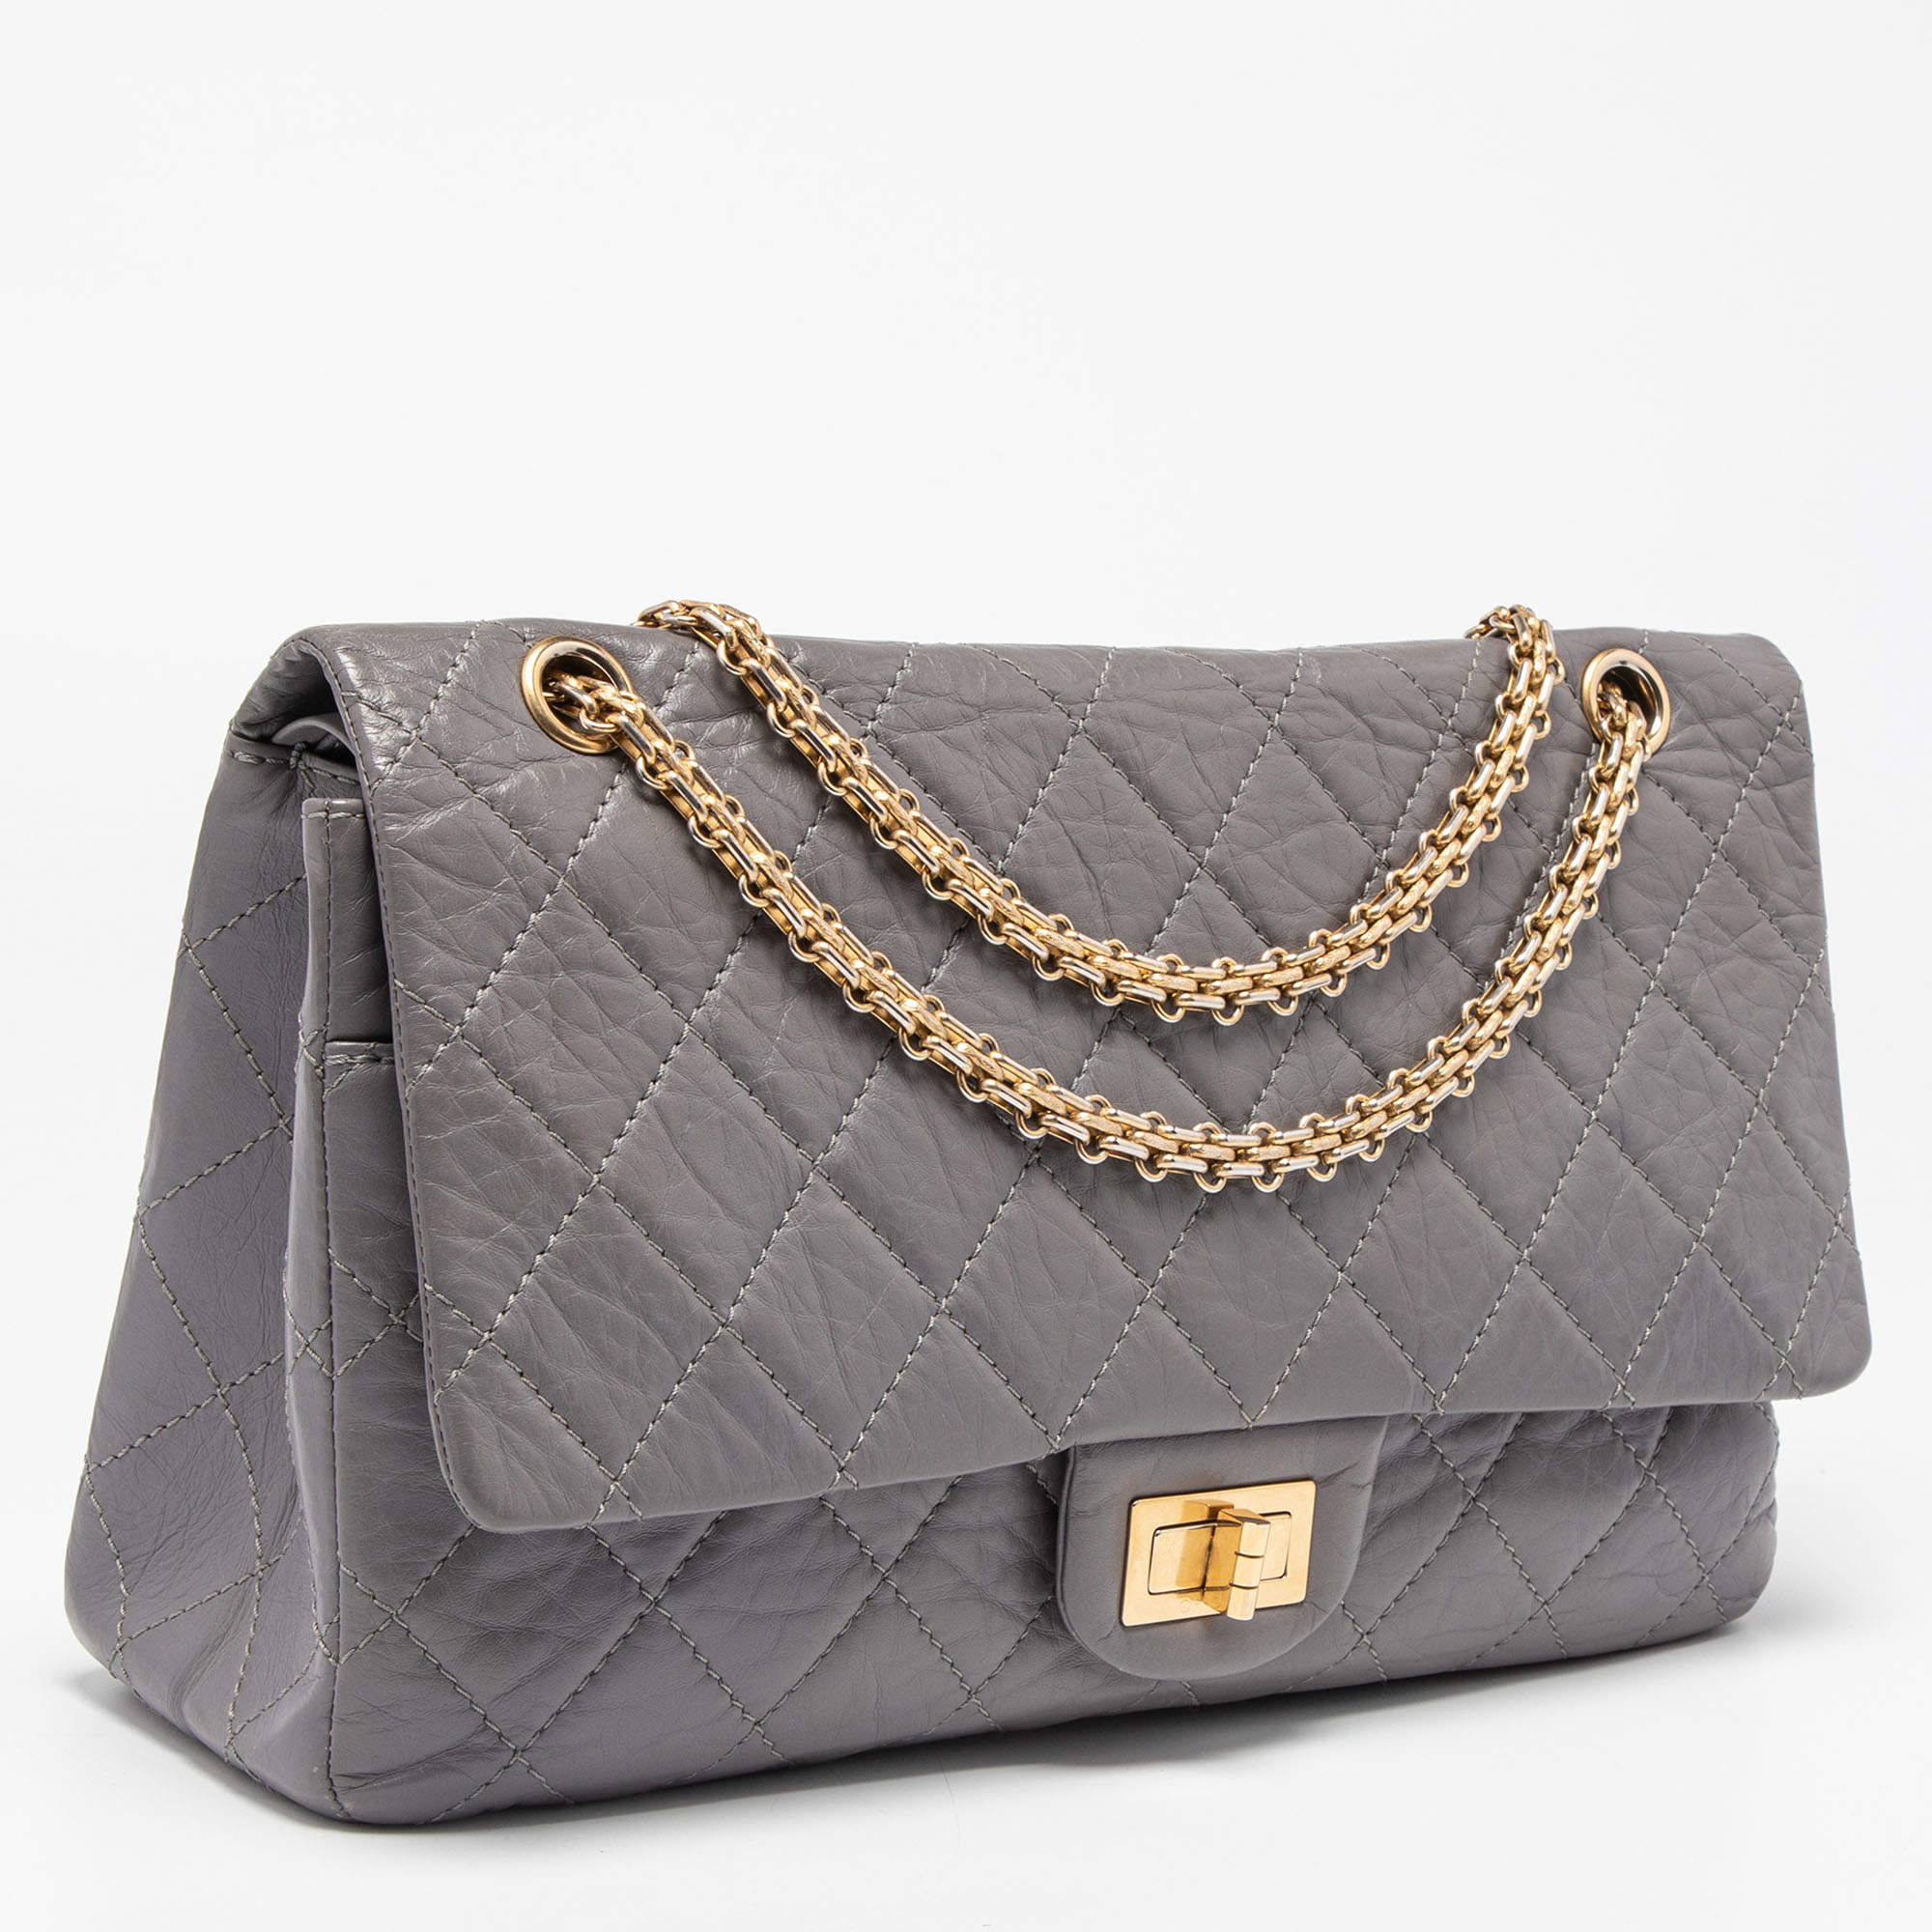 Chanel Grey Quilted Crinkled Leather Limited Edition 50th Anniversary Reissue  2.55 Classic 227 Double Flap Bag Chanel